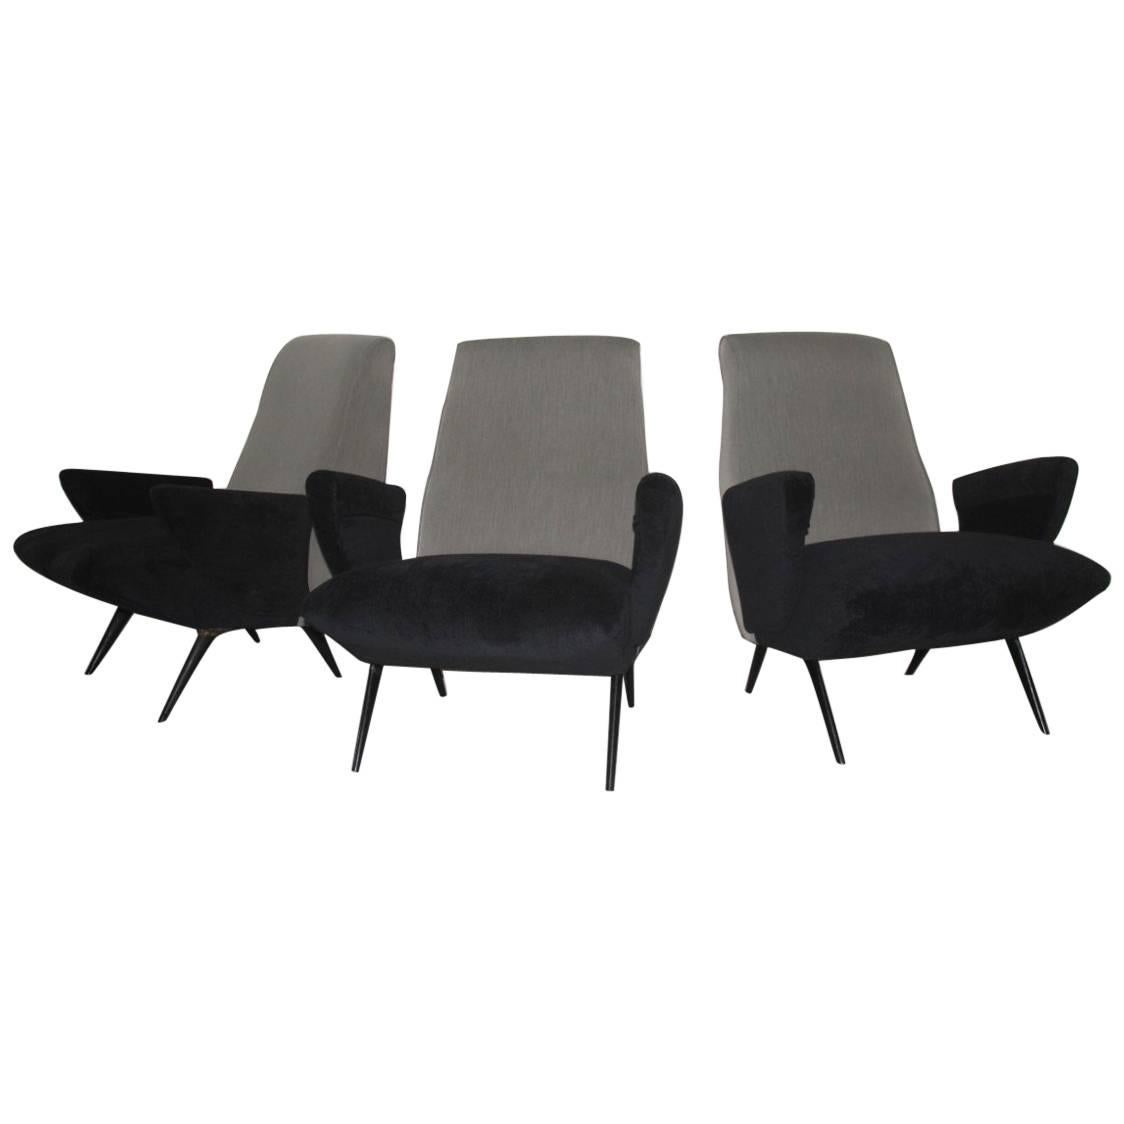 Nino Zoncada Armchair for Framar Made in Italy, 1950 Grey Black For Sale